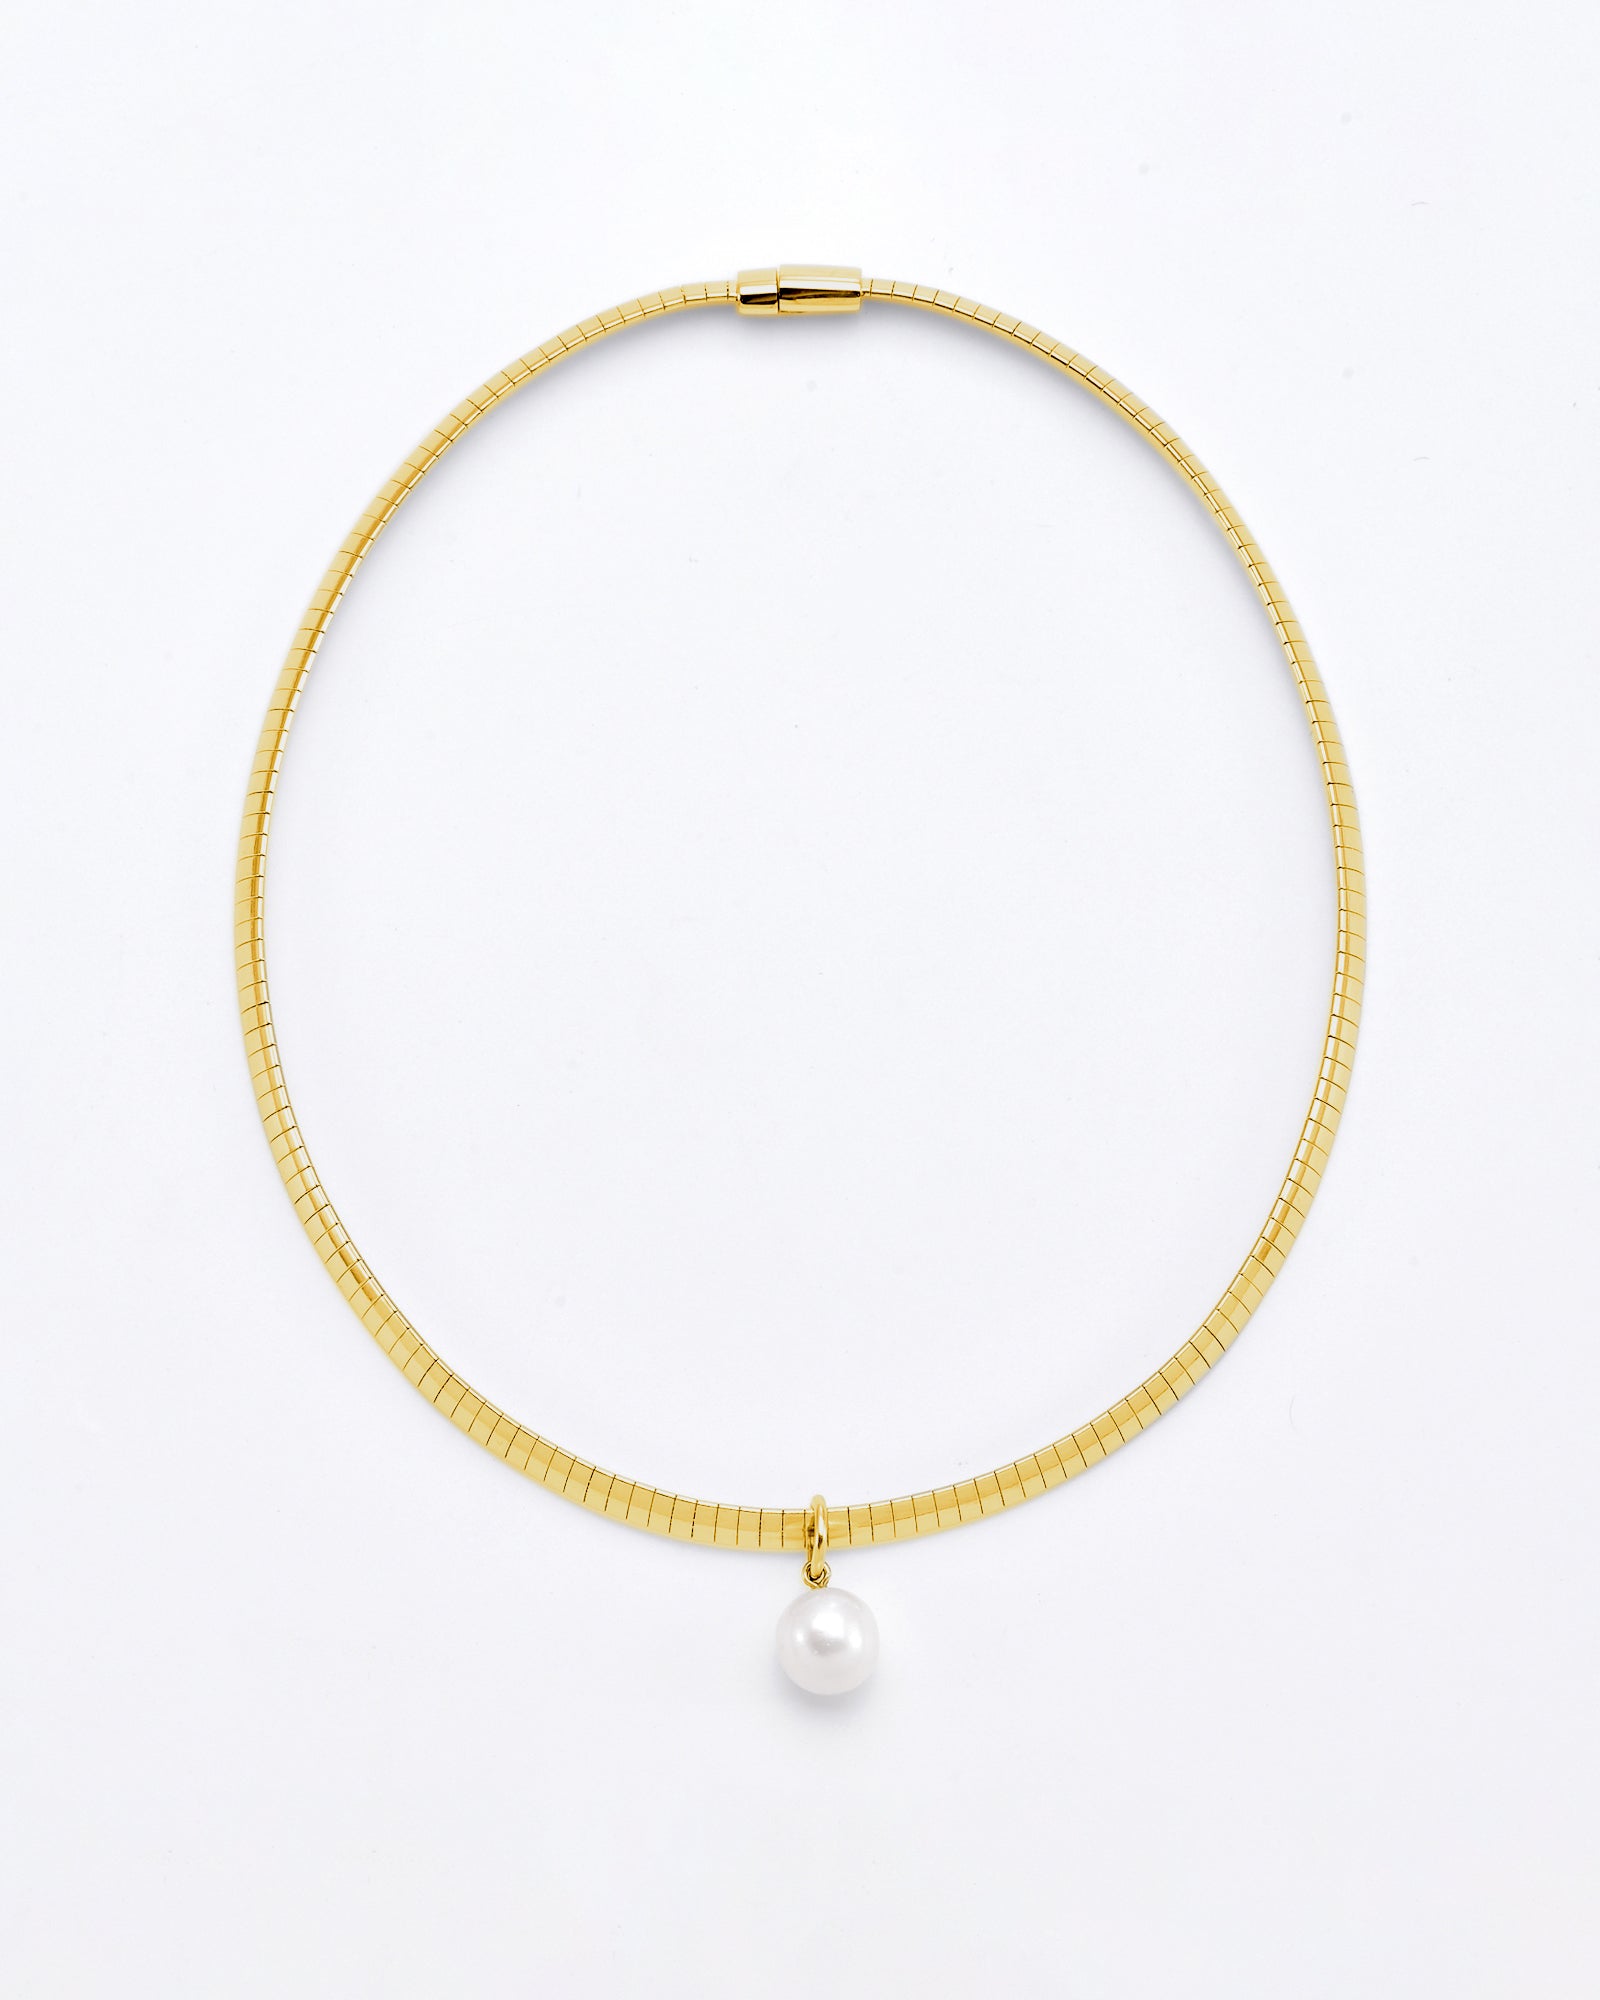 A simple and elegant For Art&#39;s Sake® Orbit Necklace Gold made of 24k gold, featuring a smooth, shiny finish and a single dangling freshwater pearl pendant at the center. The necklace is shown against a plain white background.